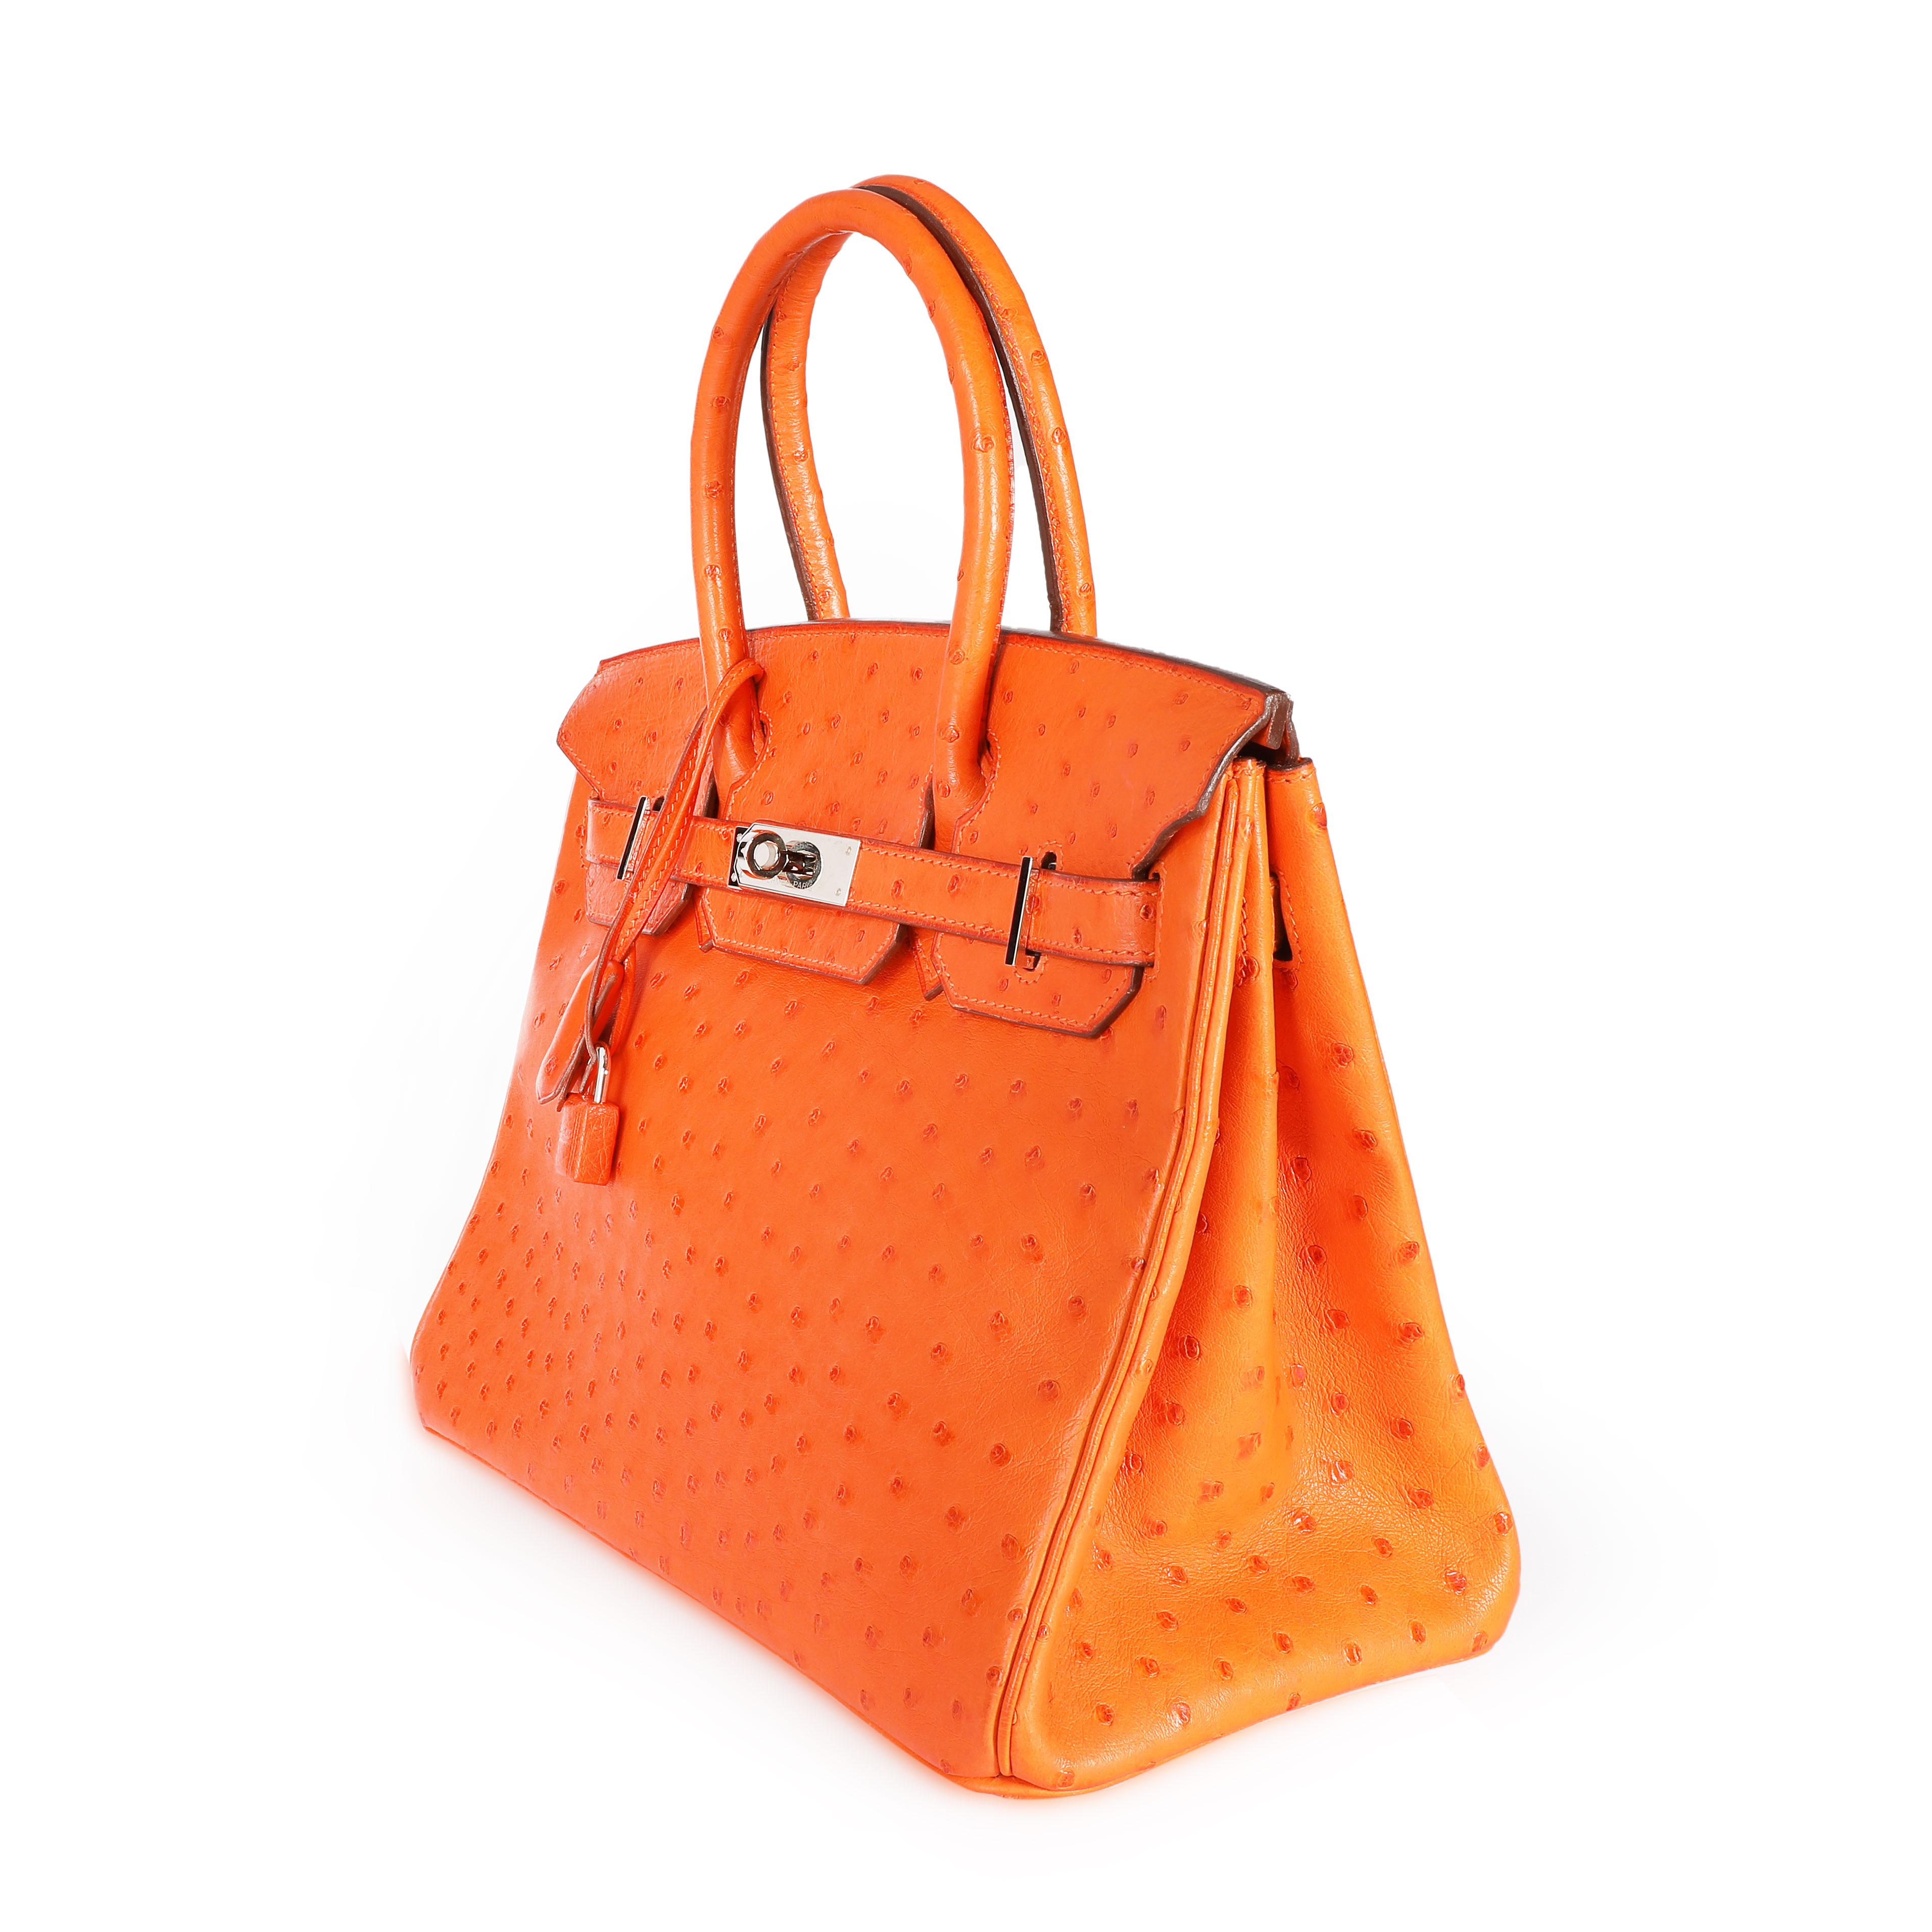 Listing Title: Hermès Tangerine Ostrich Birkin 30 PHW
SKU: 108497

Condition Description: The holy grail of handbags: the Hermès Birkin. First introduced in 1984, the Birkin is crafted entirely by hand over the course of 18 hours. Highly covetable